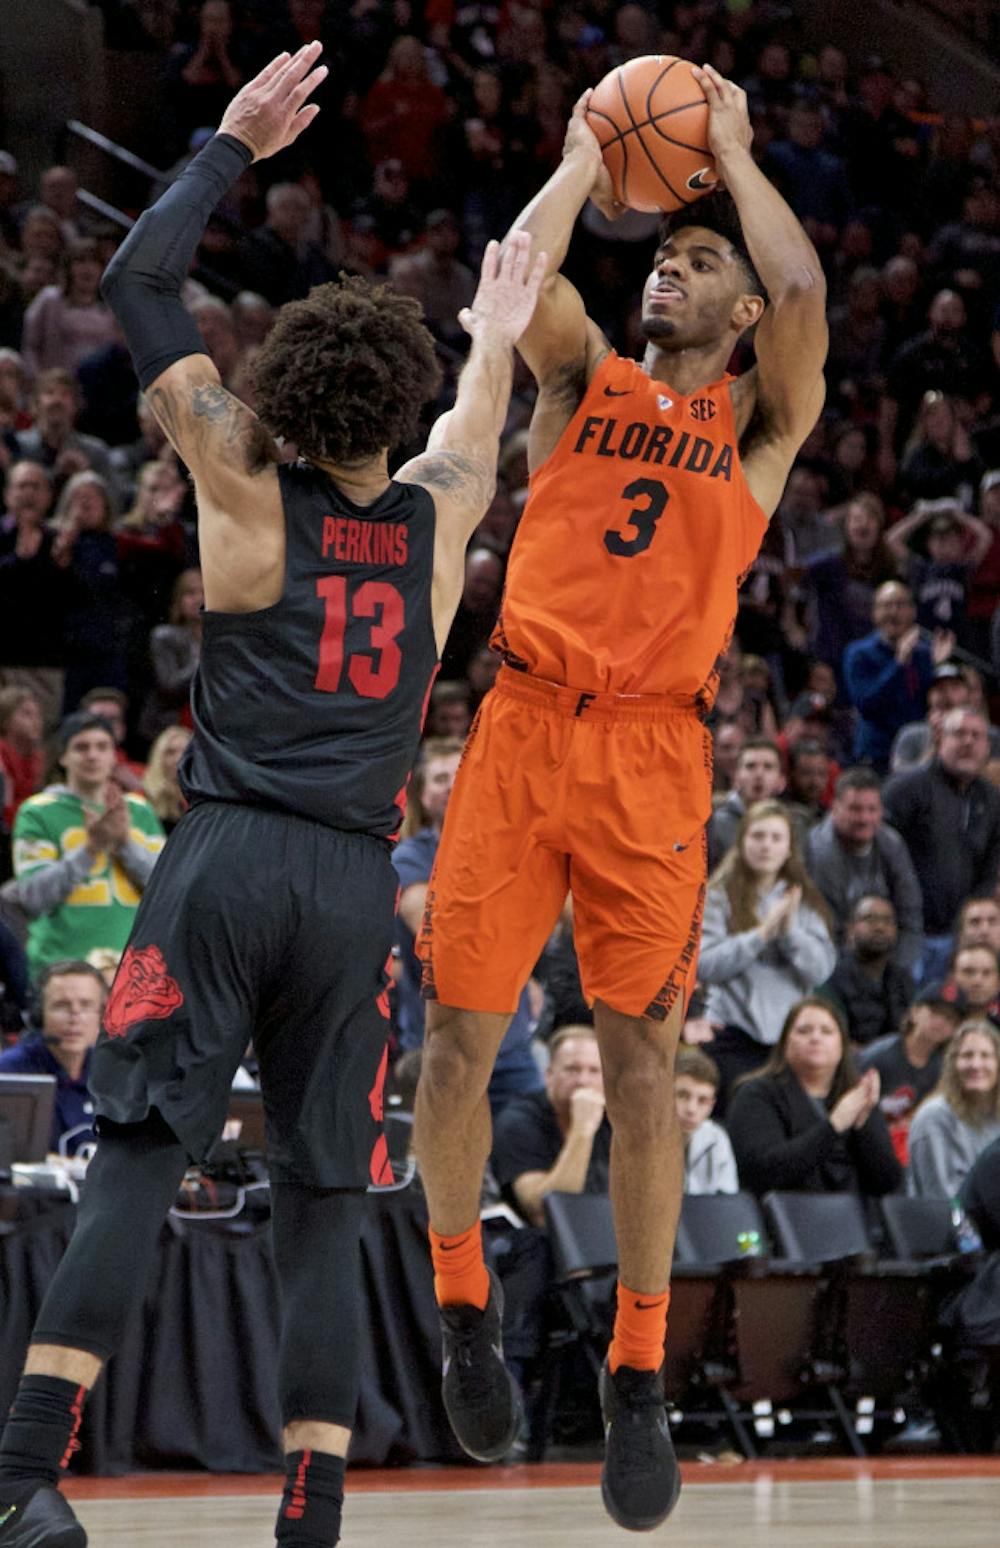 <p>Florida guard Jalen Hudson, right, shoots over Gonzaga guard Josh Perkins during the second half of an NCAA college basketball game in the Phil Knight Invitational tournament in Portland, Ore., Friday, Nov. 24, 2017. Florida won 111-105. (AP Photo/Craig Mitchelldyer)</p>